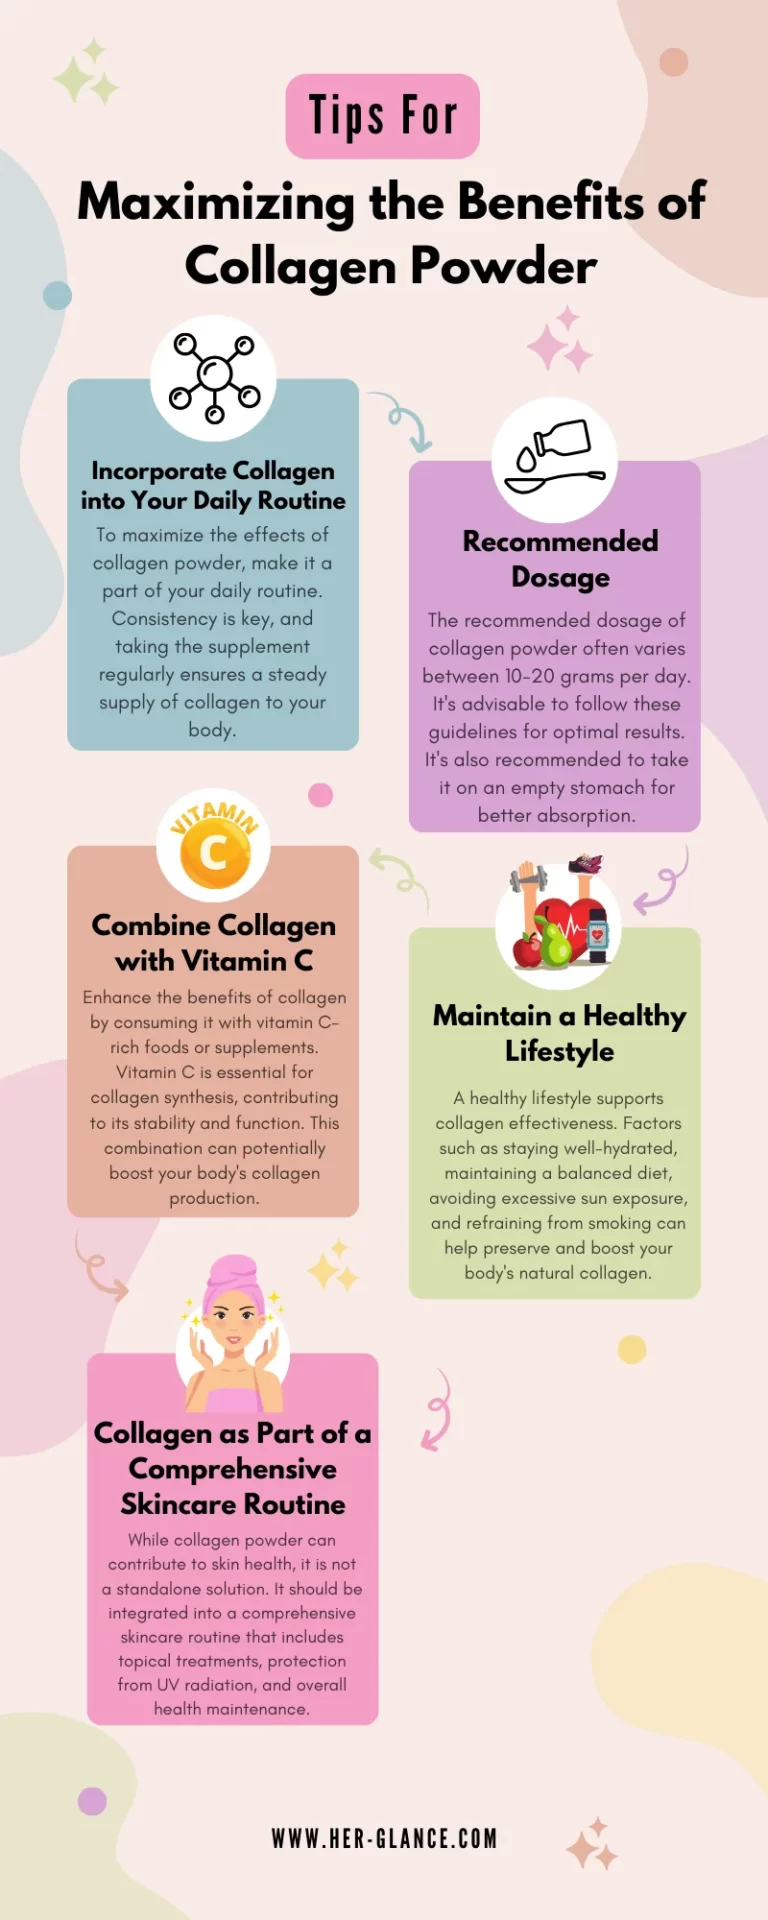 Tips for Maximizing the Benefits of Collagen Powder